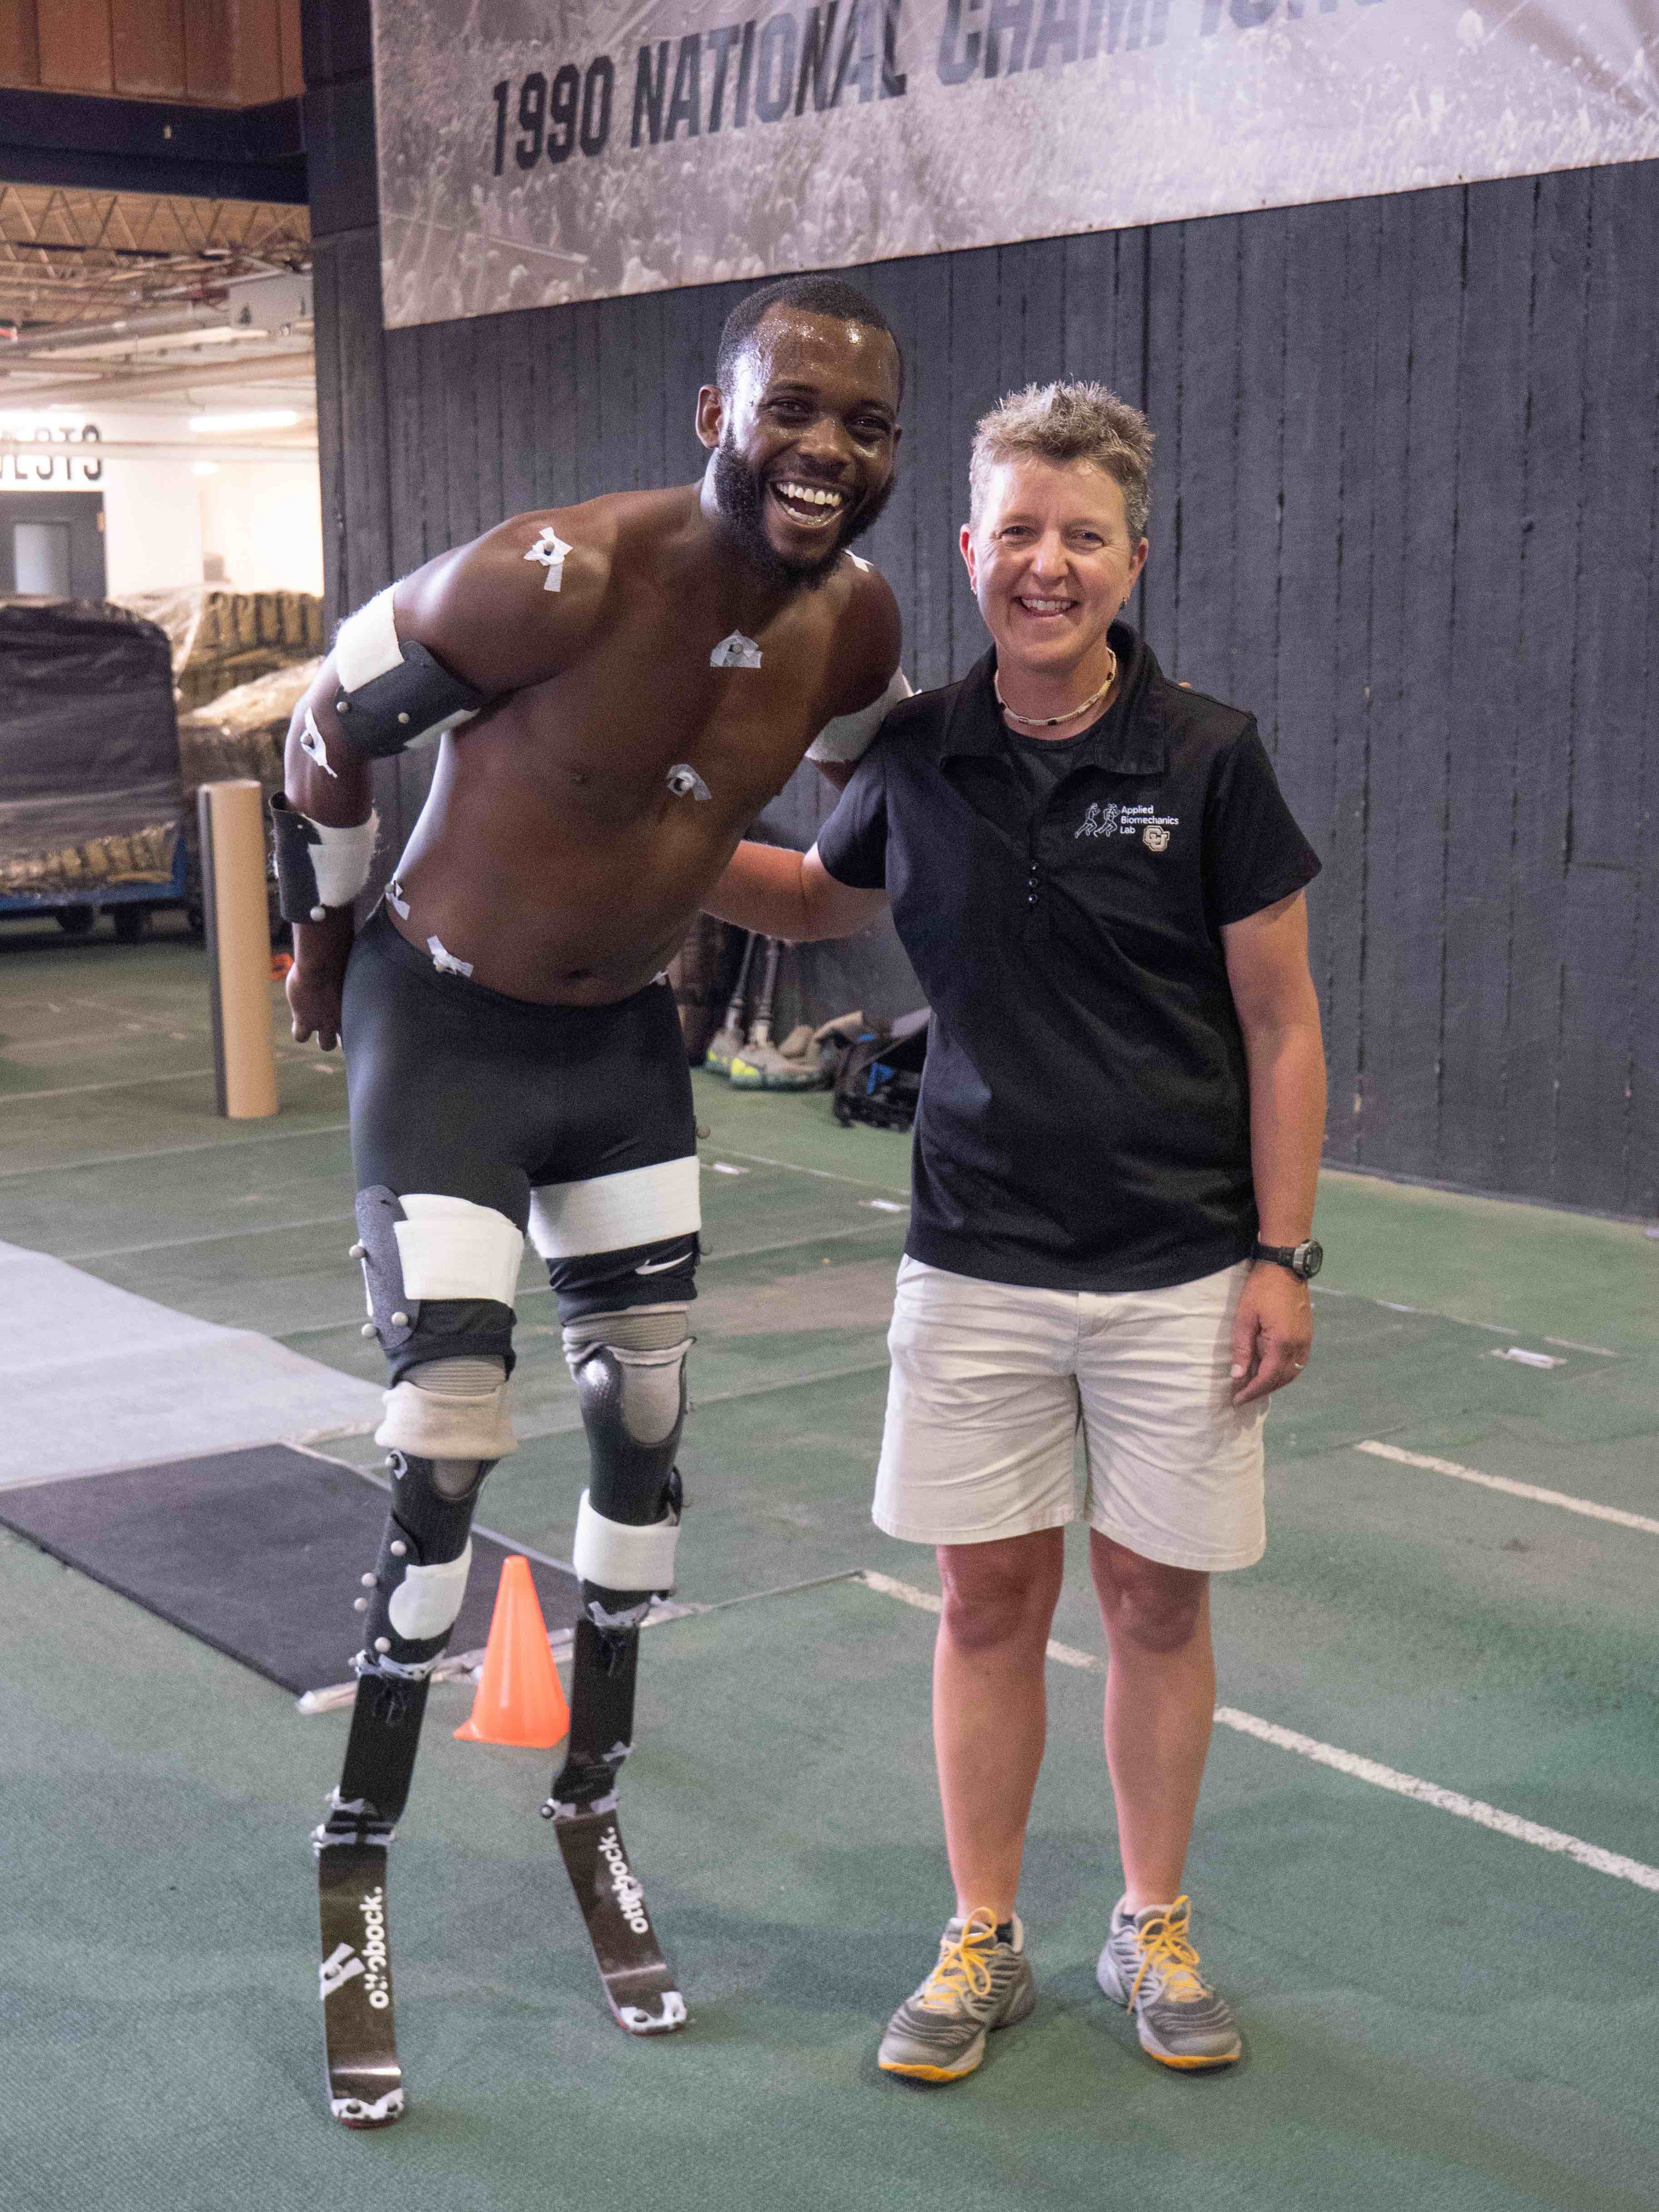 World's fastest blade runner gets no competitive advantage from prostheses,  study shows, CU Boulder Today